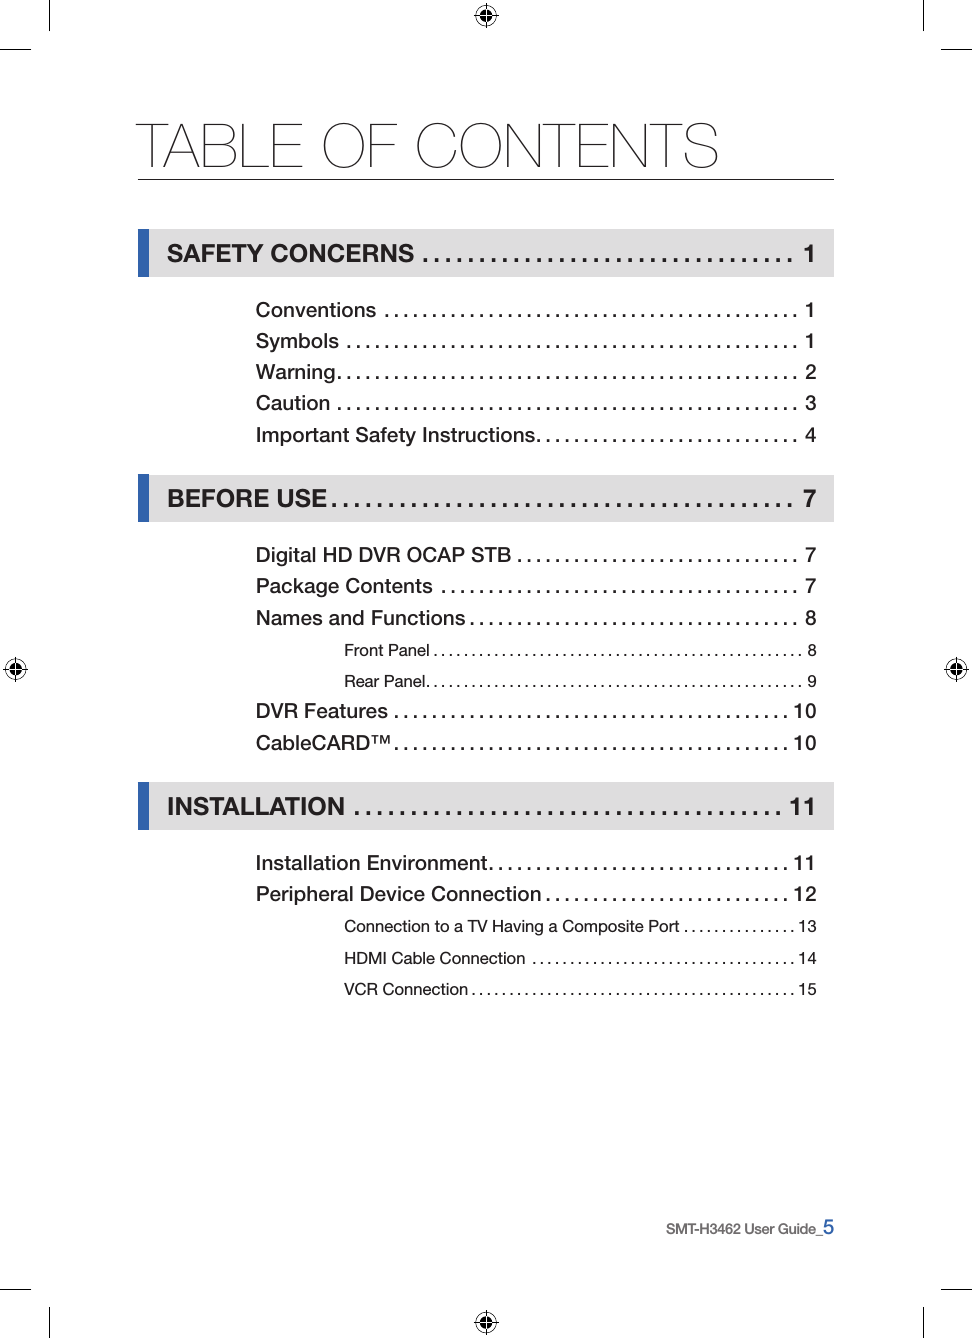 SMT-H3462 User Guide_5TABLE OF CONTENTSSAFETY CONCERNS .................................1Conventions ............................................1Symbols ................................................1Warning .................................................2Caution .................................................3Important Safety Instructions ............................4BEFORE USE .........................................7Digital HD DVR OCAP STB ..............................7Package Contents ......................................7Names and Functions ...................................8Front Panel .................................................8Rear Panel ..................................................9DVR Features . . . . . . . . . . . . . . . . . . . . . . . . . . . . . . . . . . . . . . . . . . 10CableCARD™ ..........................................10INSTALLATION ......................................11Installation Environment ................................11Peripheral Device Connection ..........................12Connection to a TV Having a Composite Port ...............13HDMI Cable Connection ...................................14VCR Connection ...........................................15